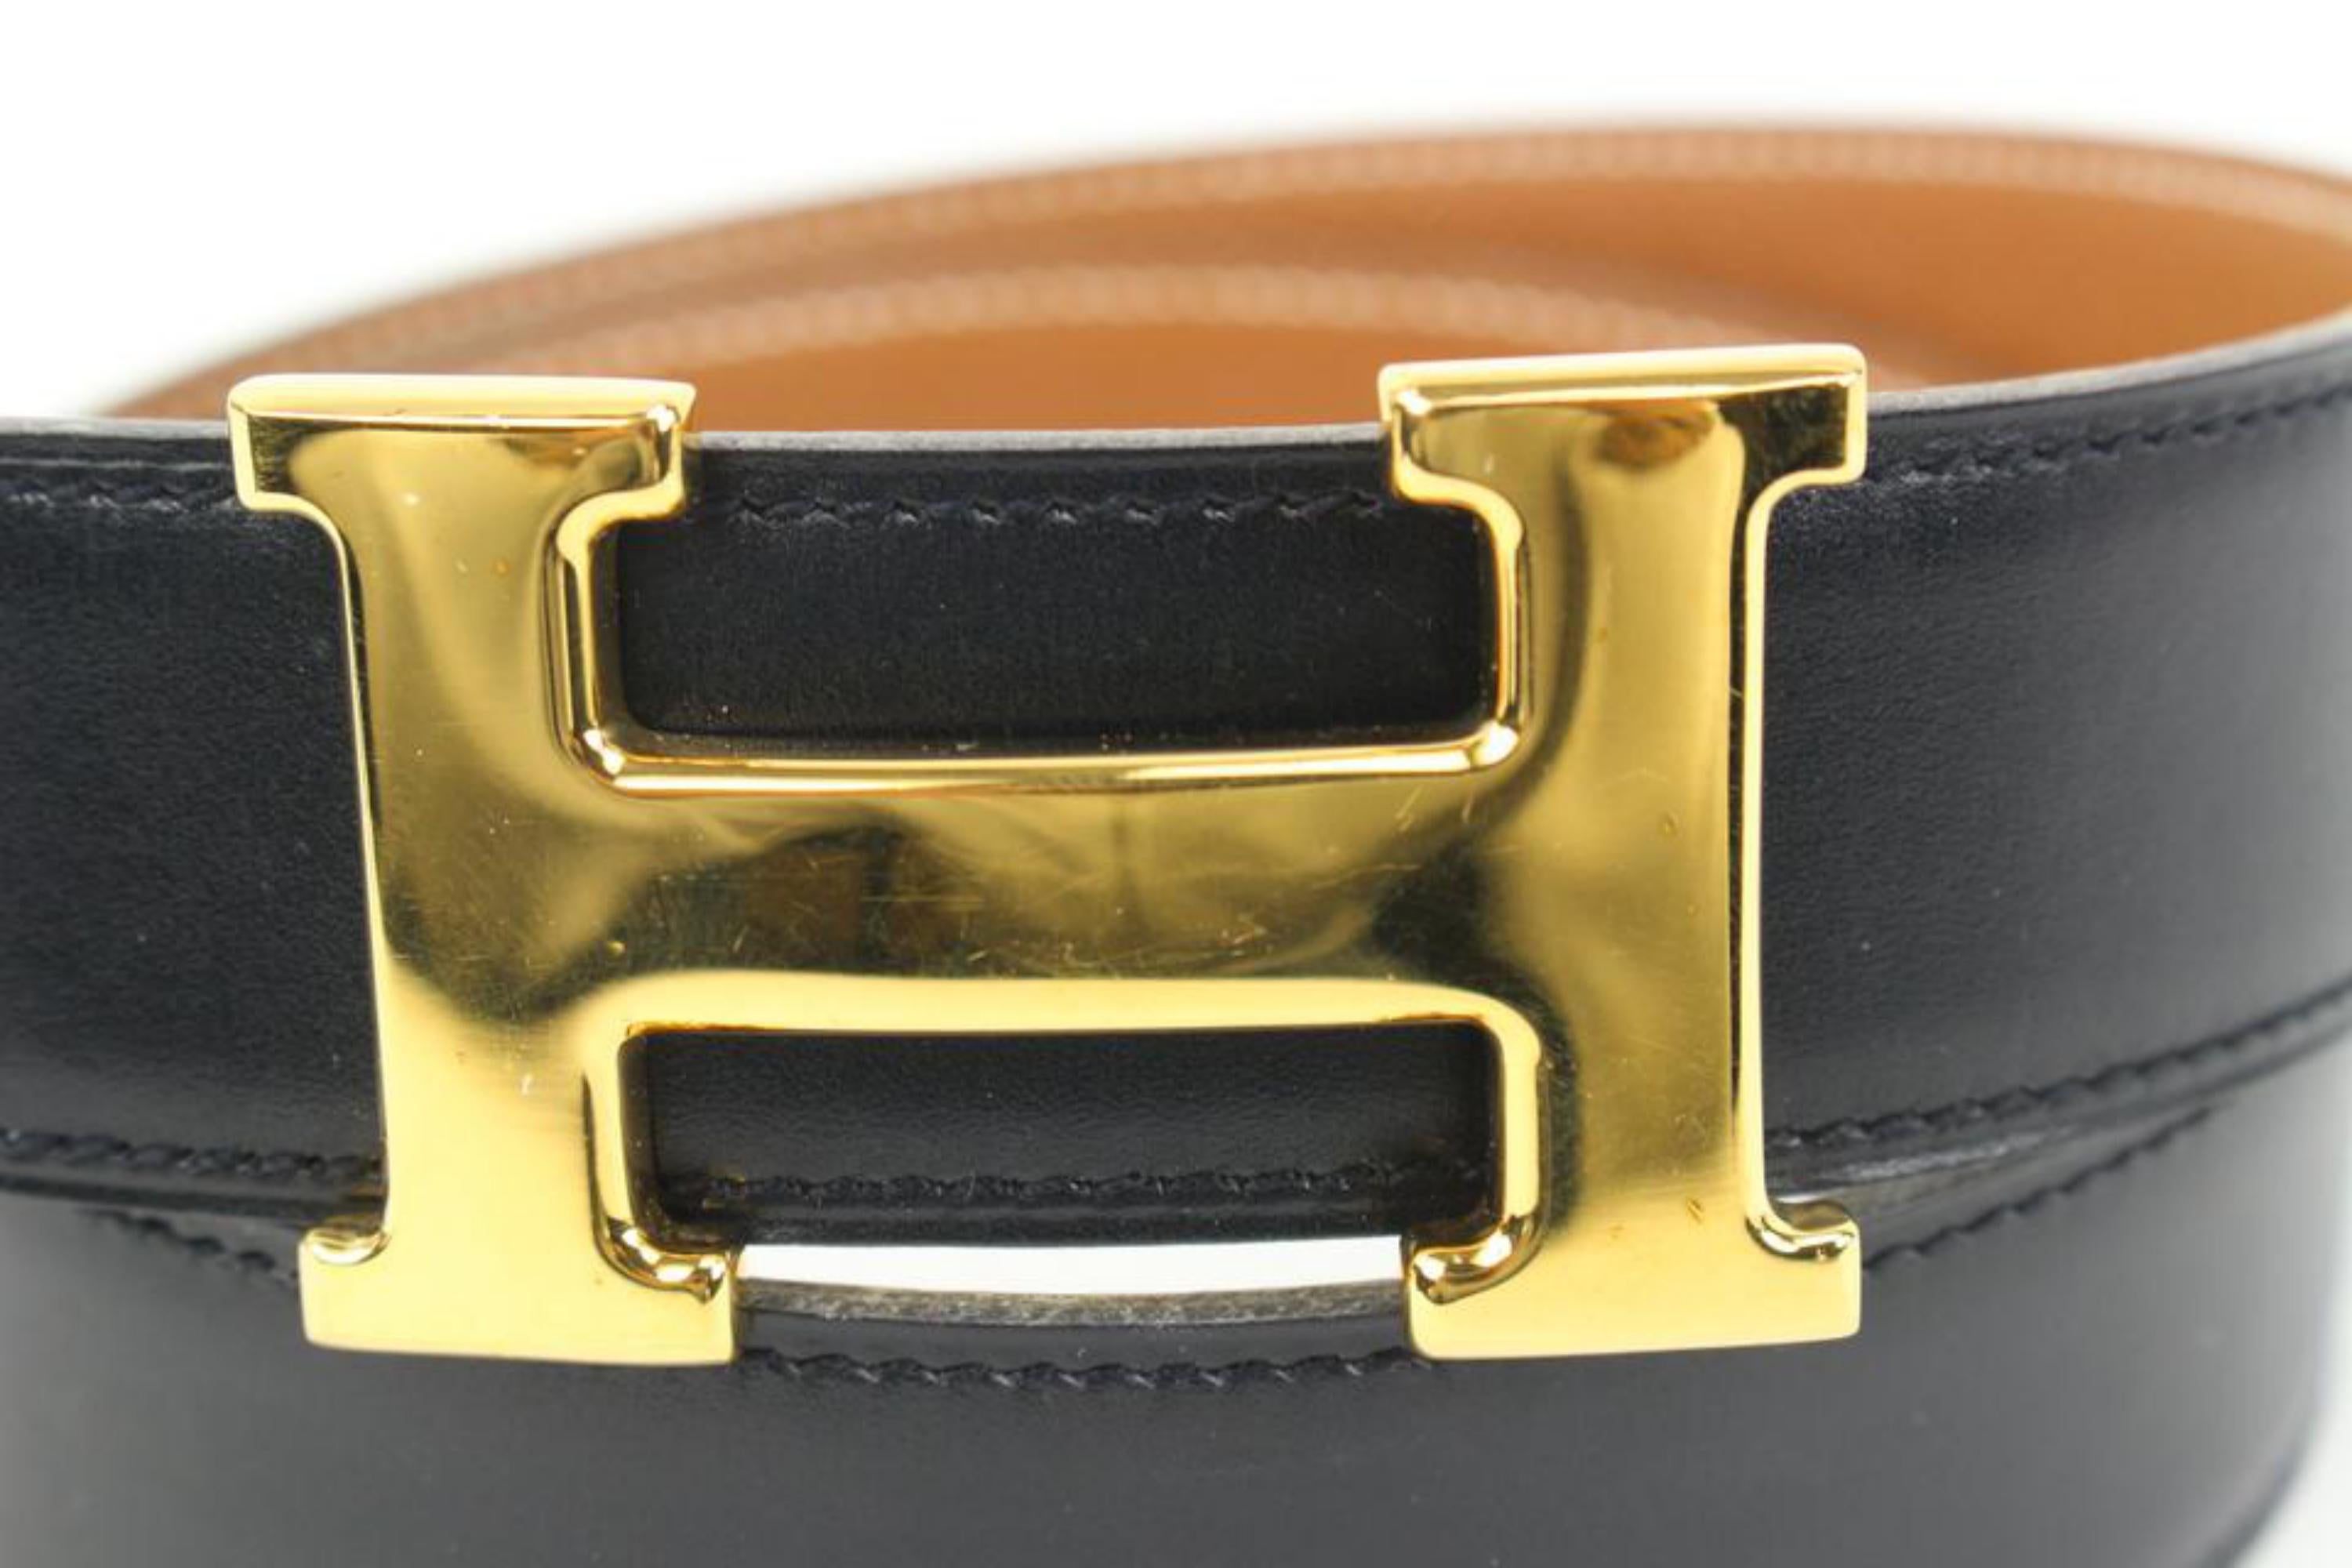 Hermès Black x Brown x Gold 32mm Reversible H Logo Belt Kit 49h421s In Excellent Condition For Sale In Dix hills, NY